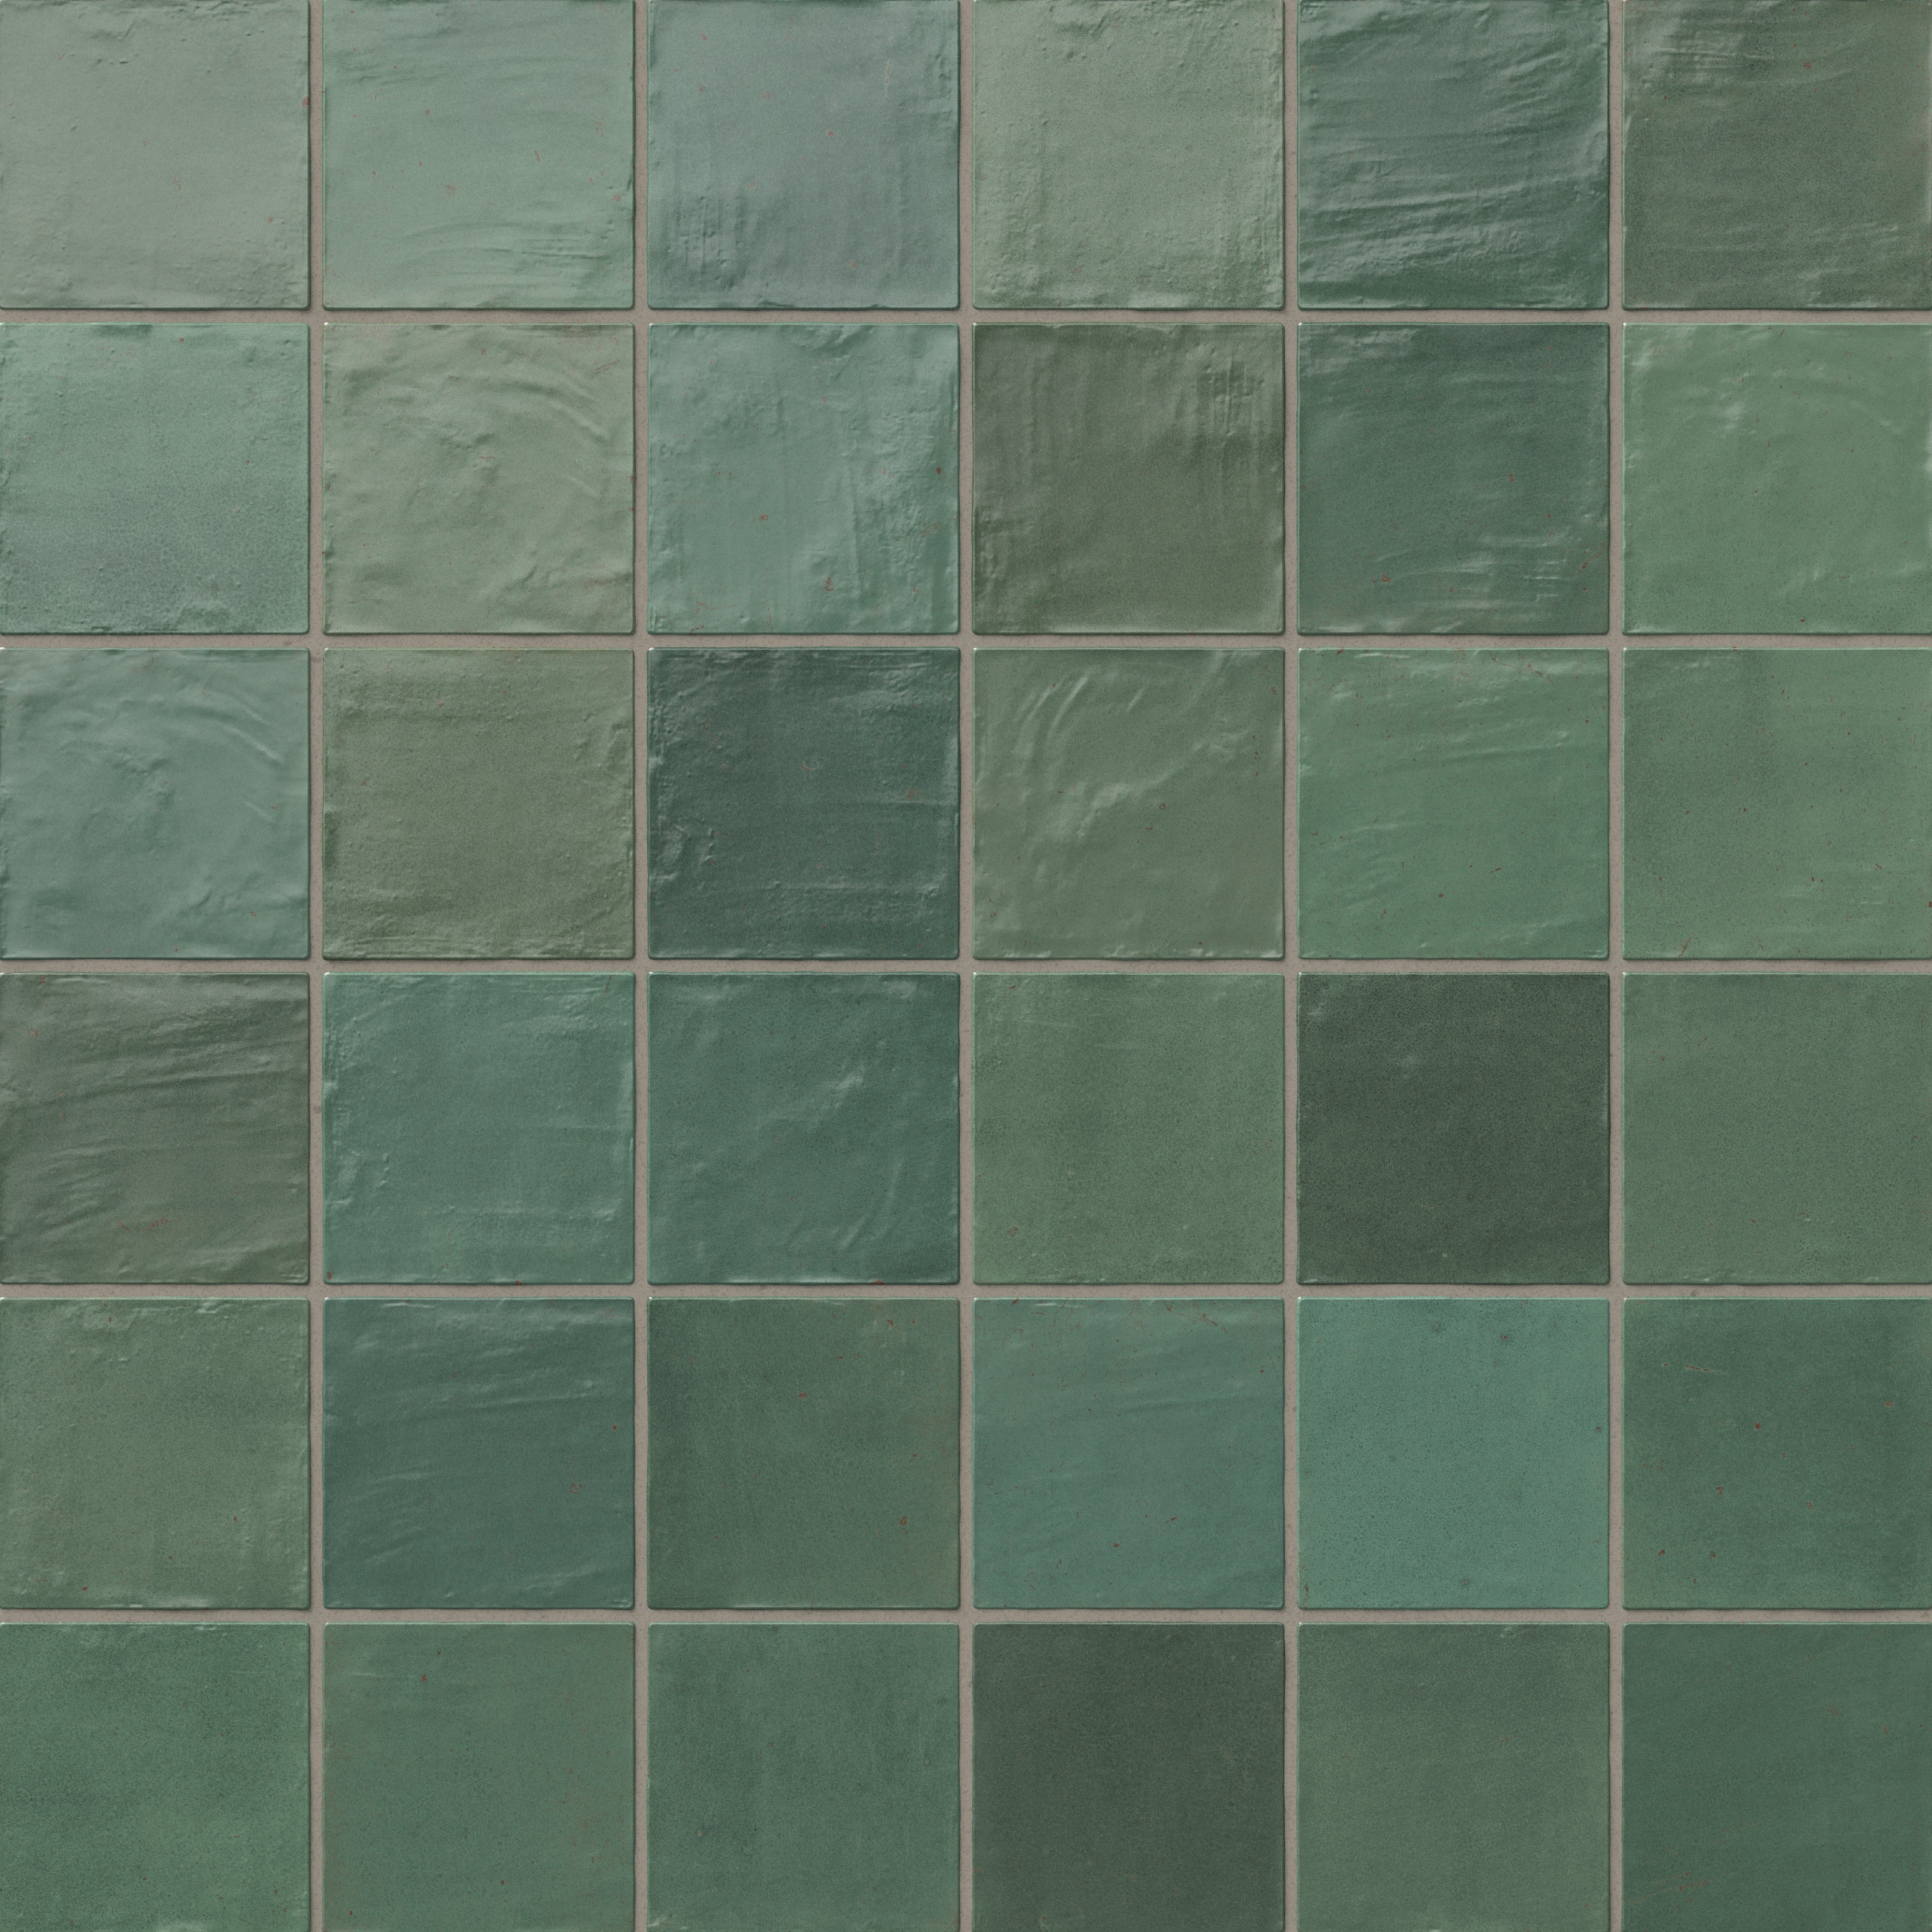 Everly 4x4 Matte Ceramic Tile in Forest